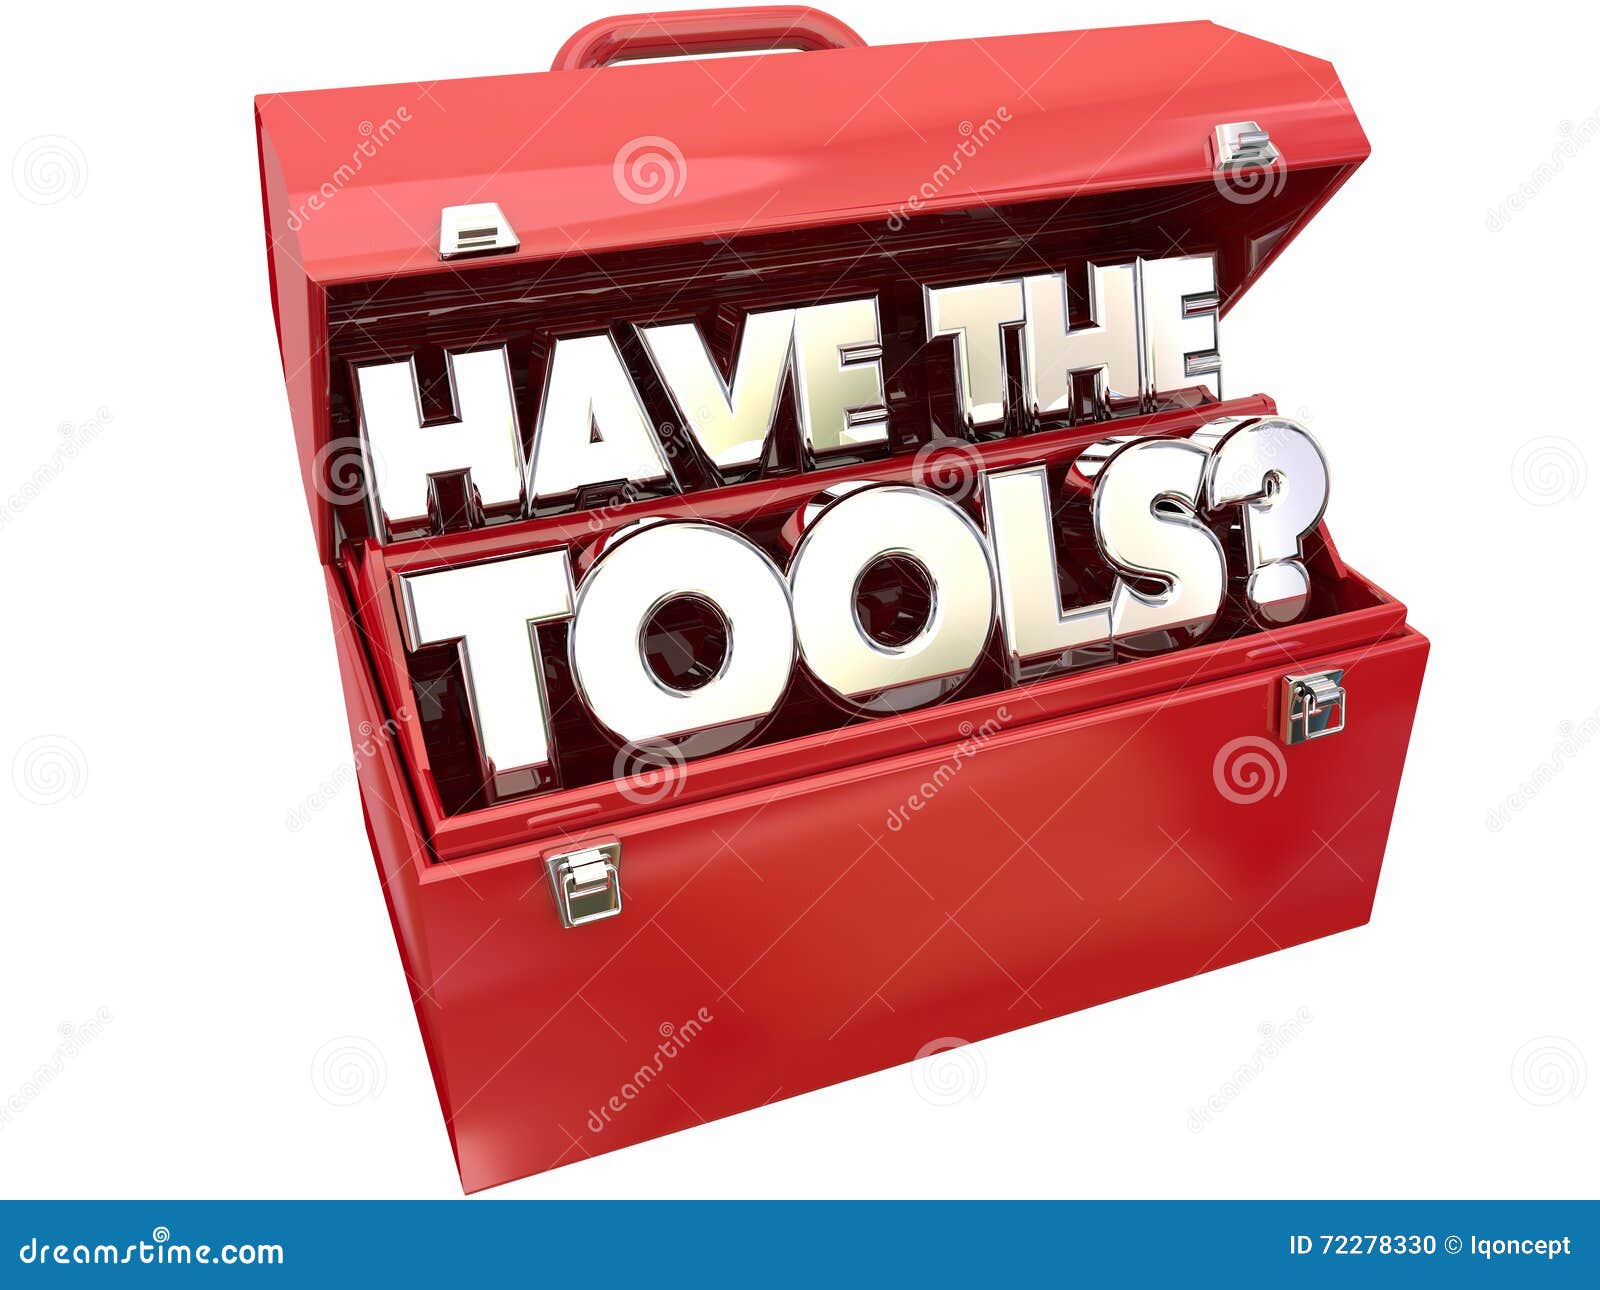 have the tools question expertise necessary toolbox